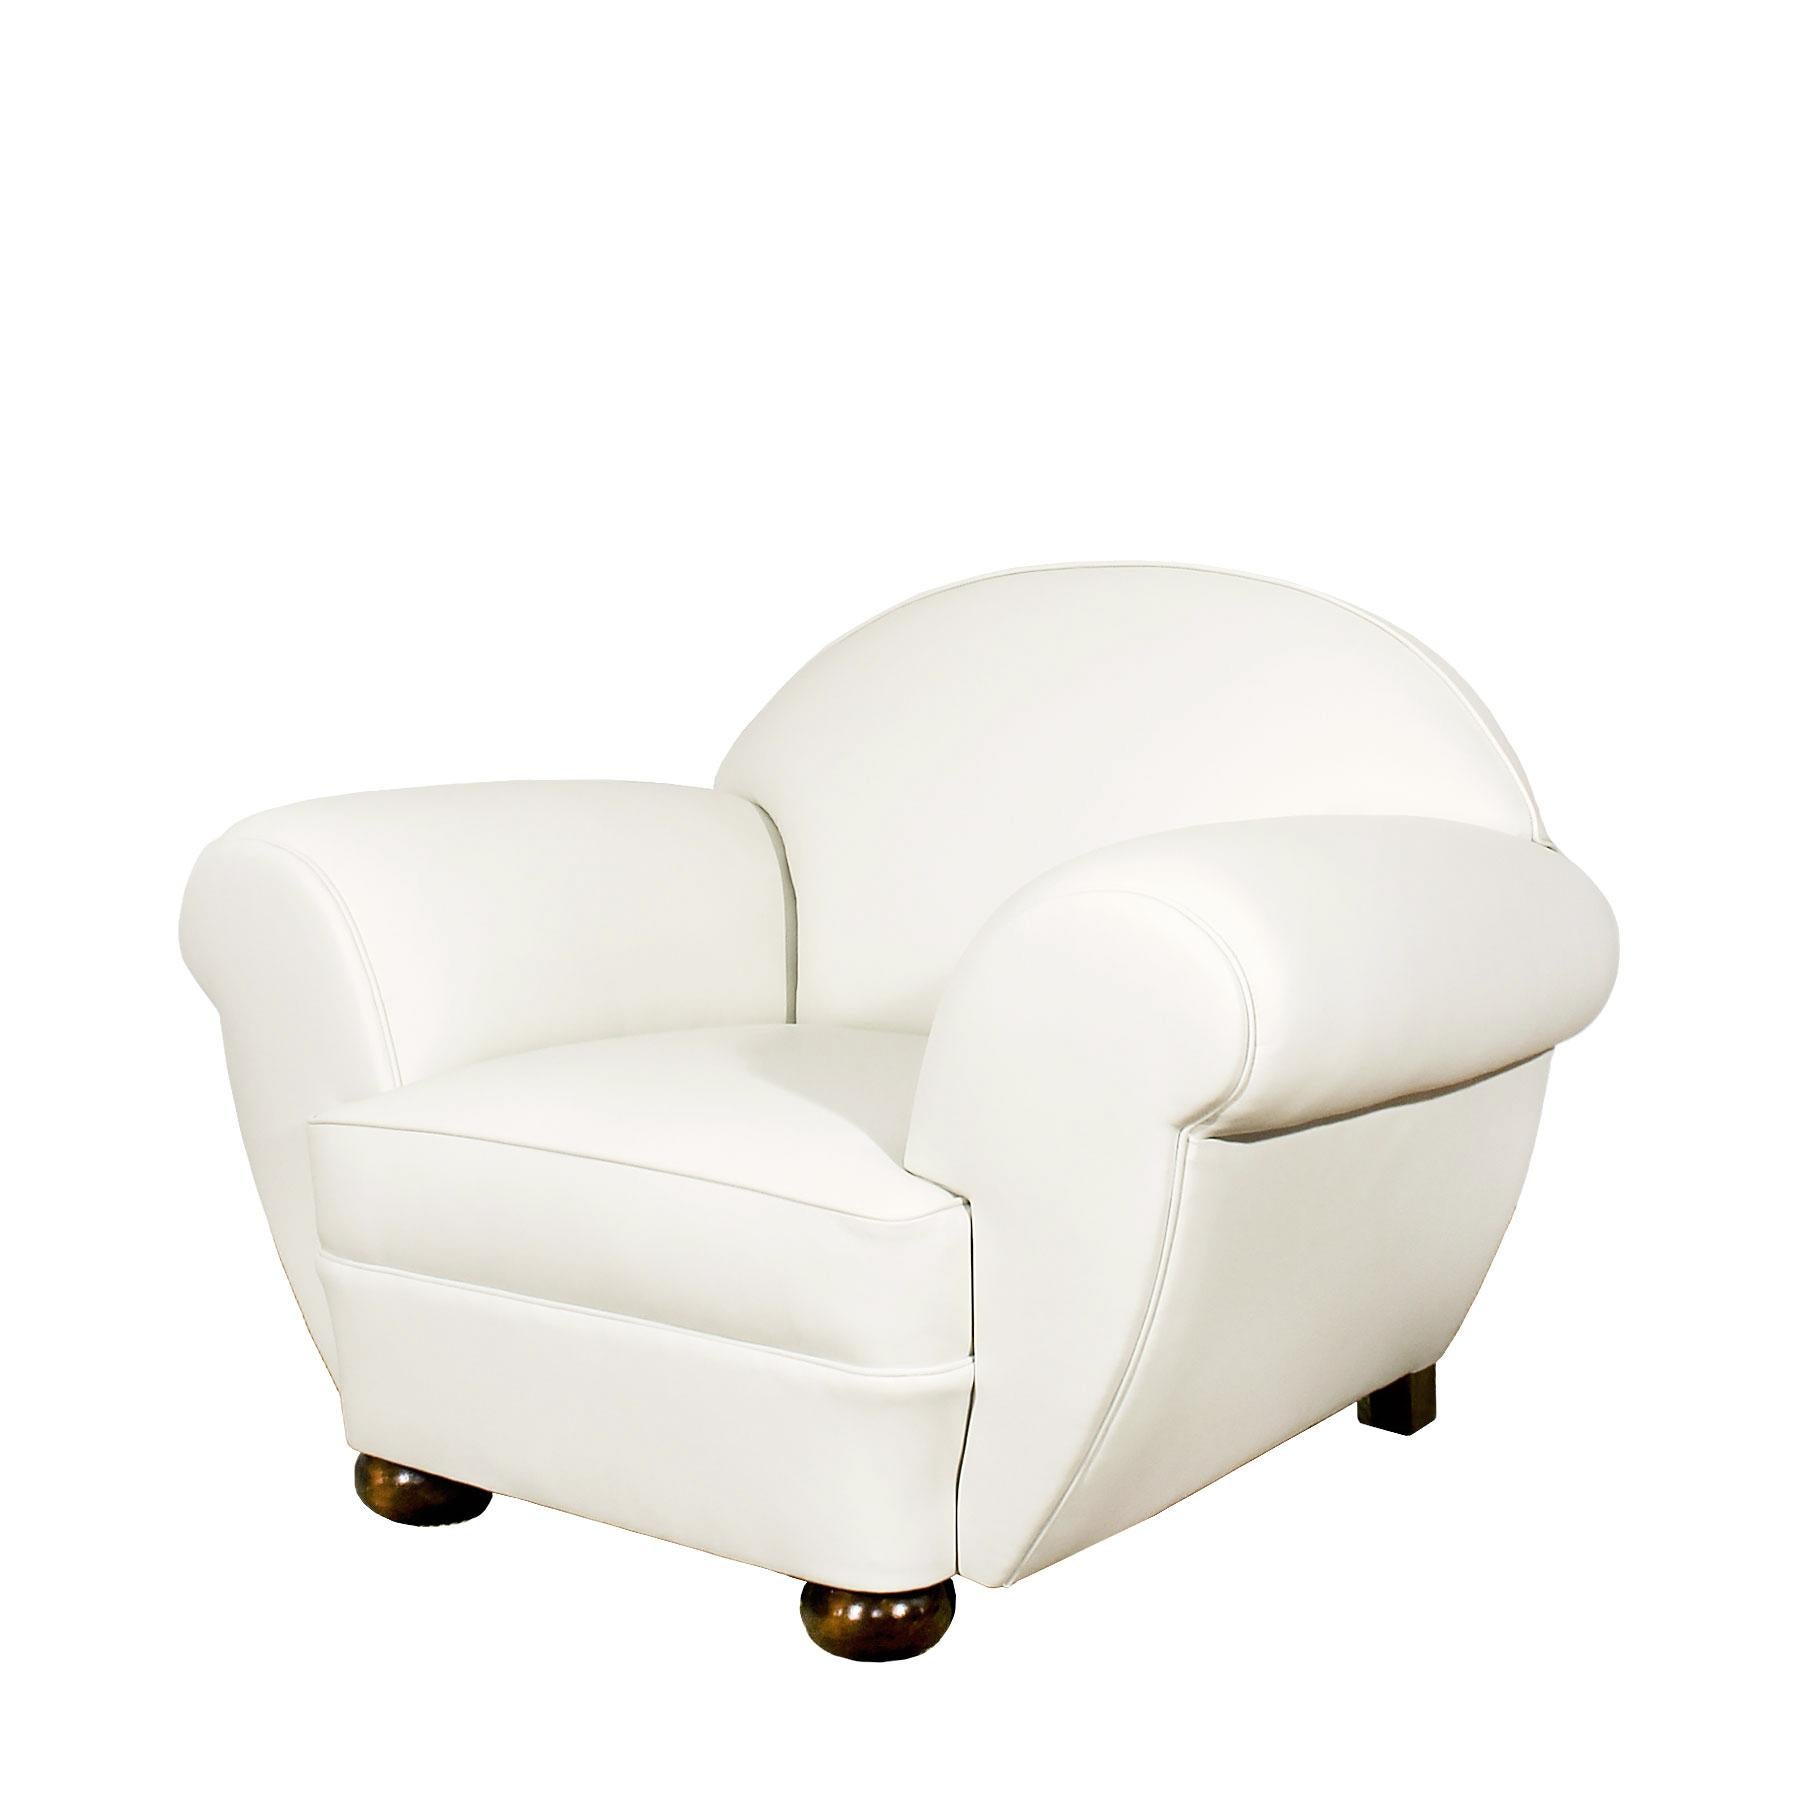 Belgian Pair of Large Art Deco Club Armchairs in Ivory Leather - Belgium For Sale